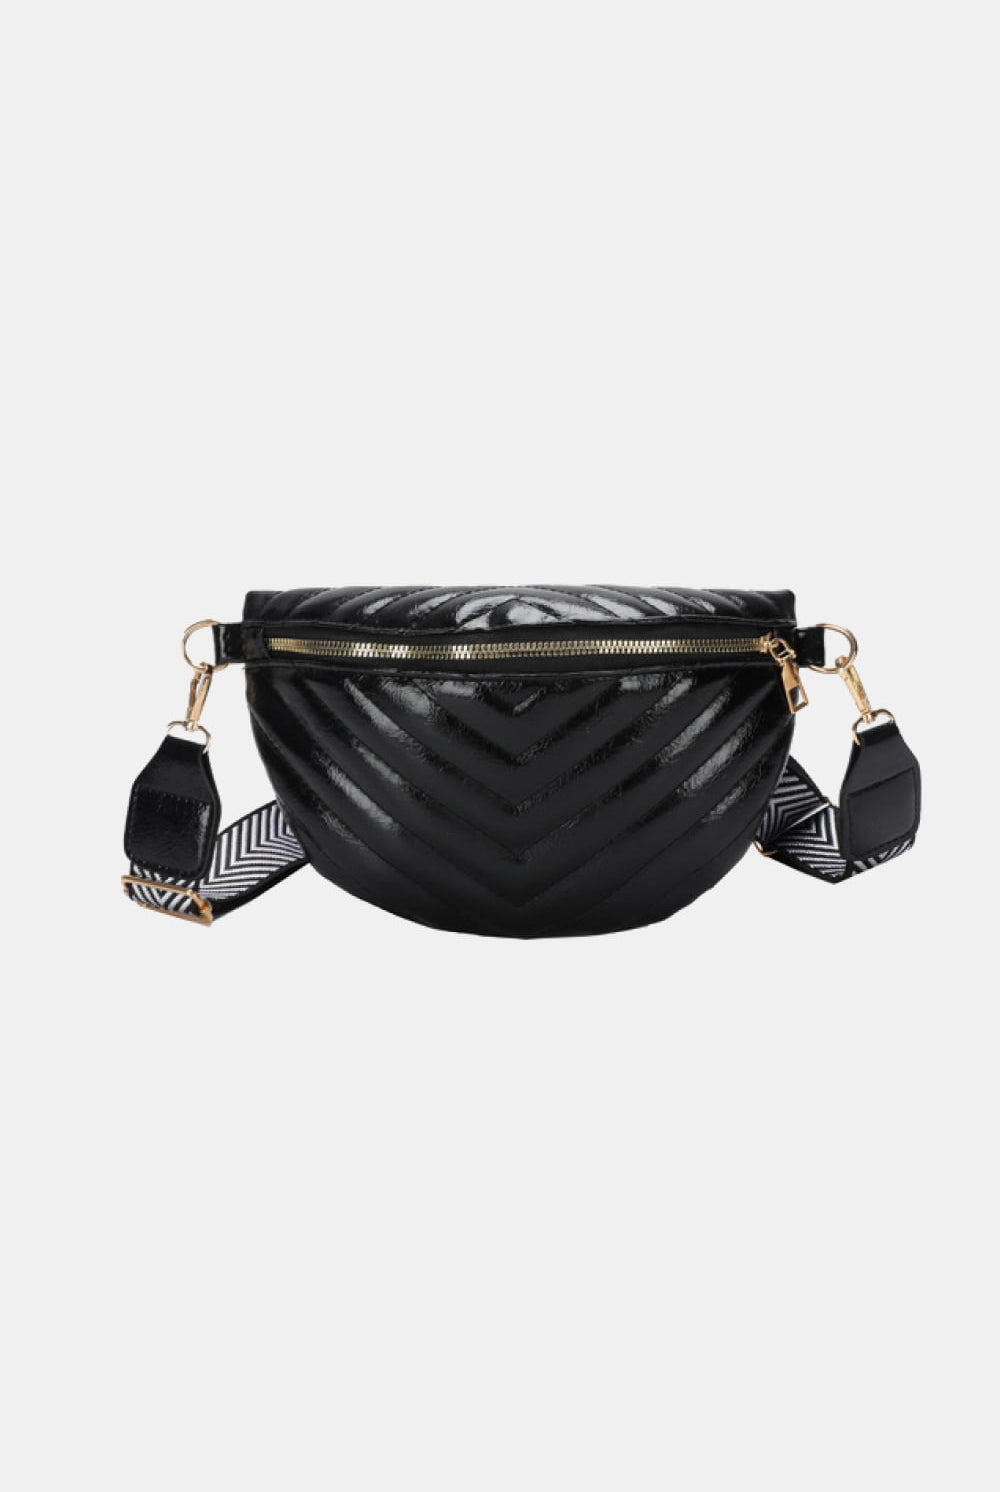 PU Leather Sling Bag - GemThreads Boutique